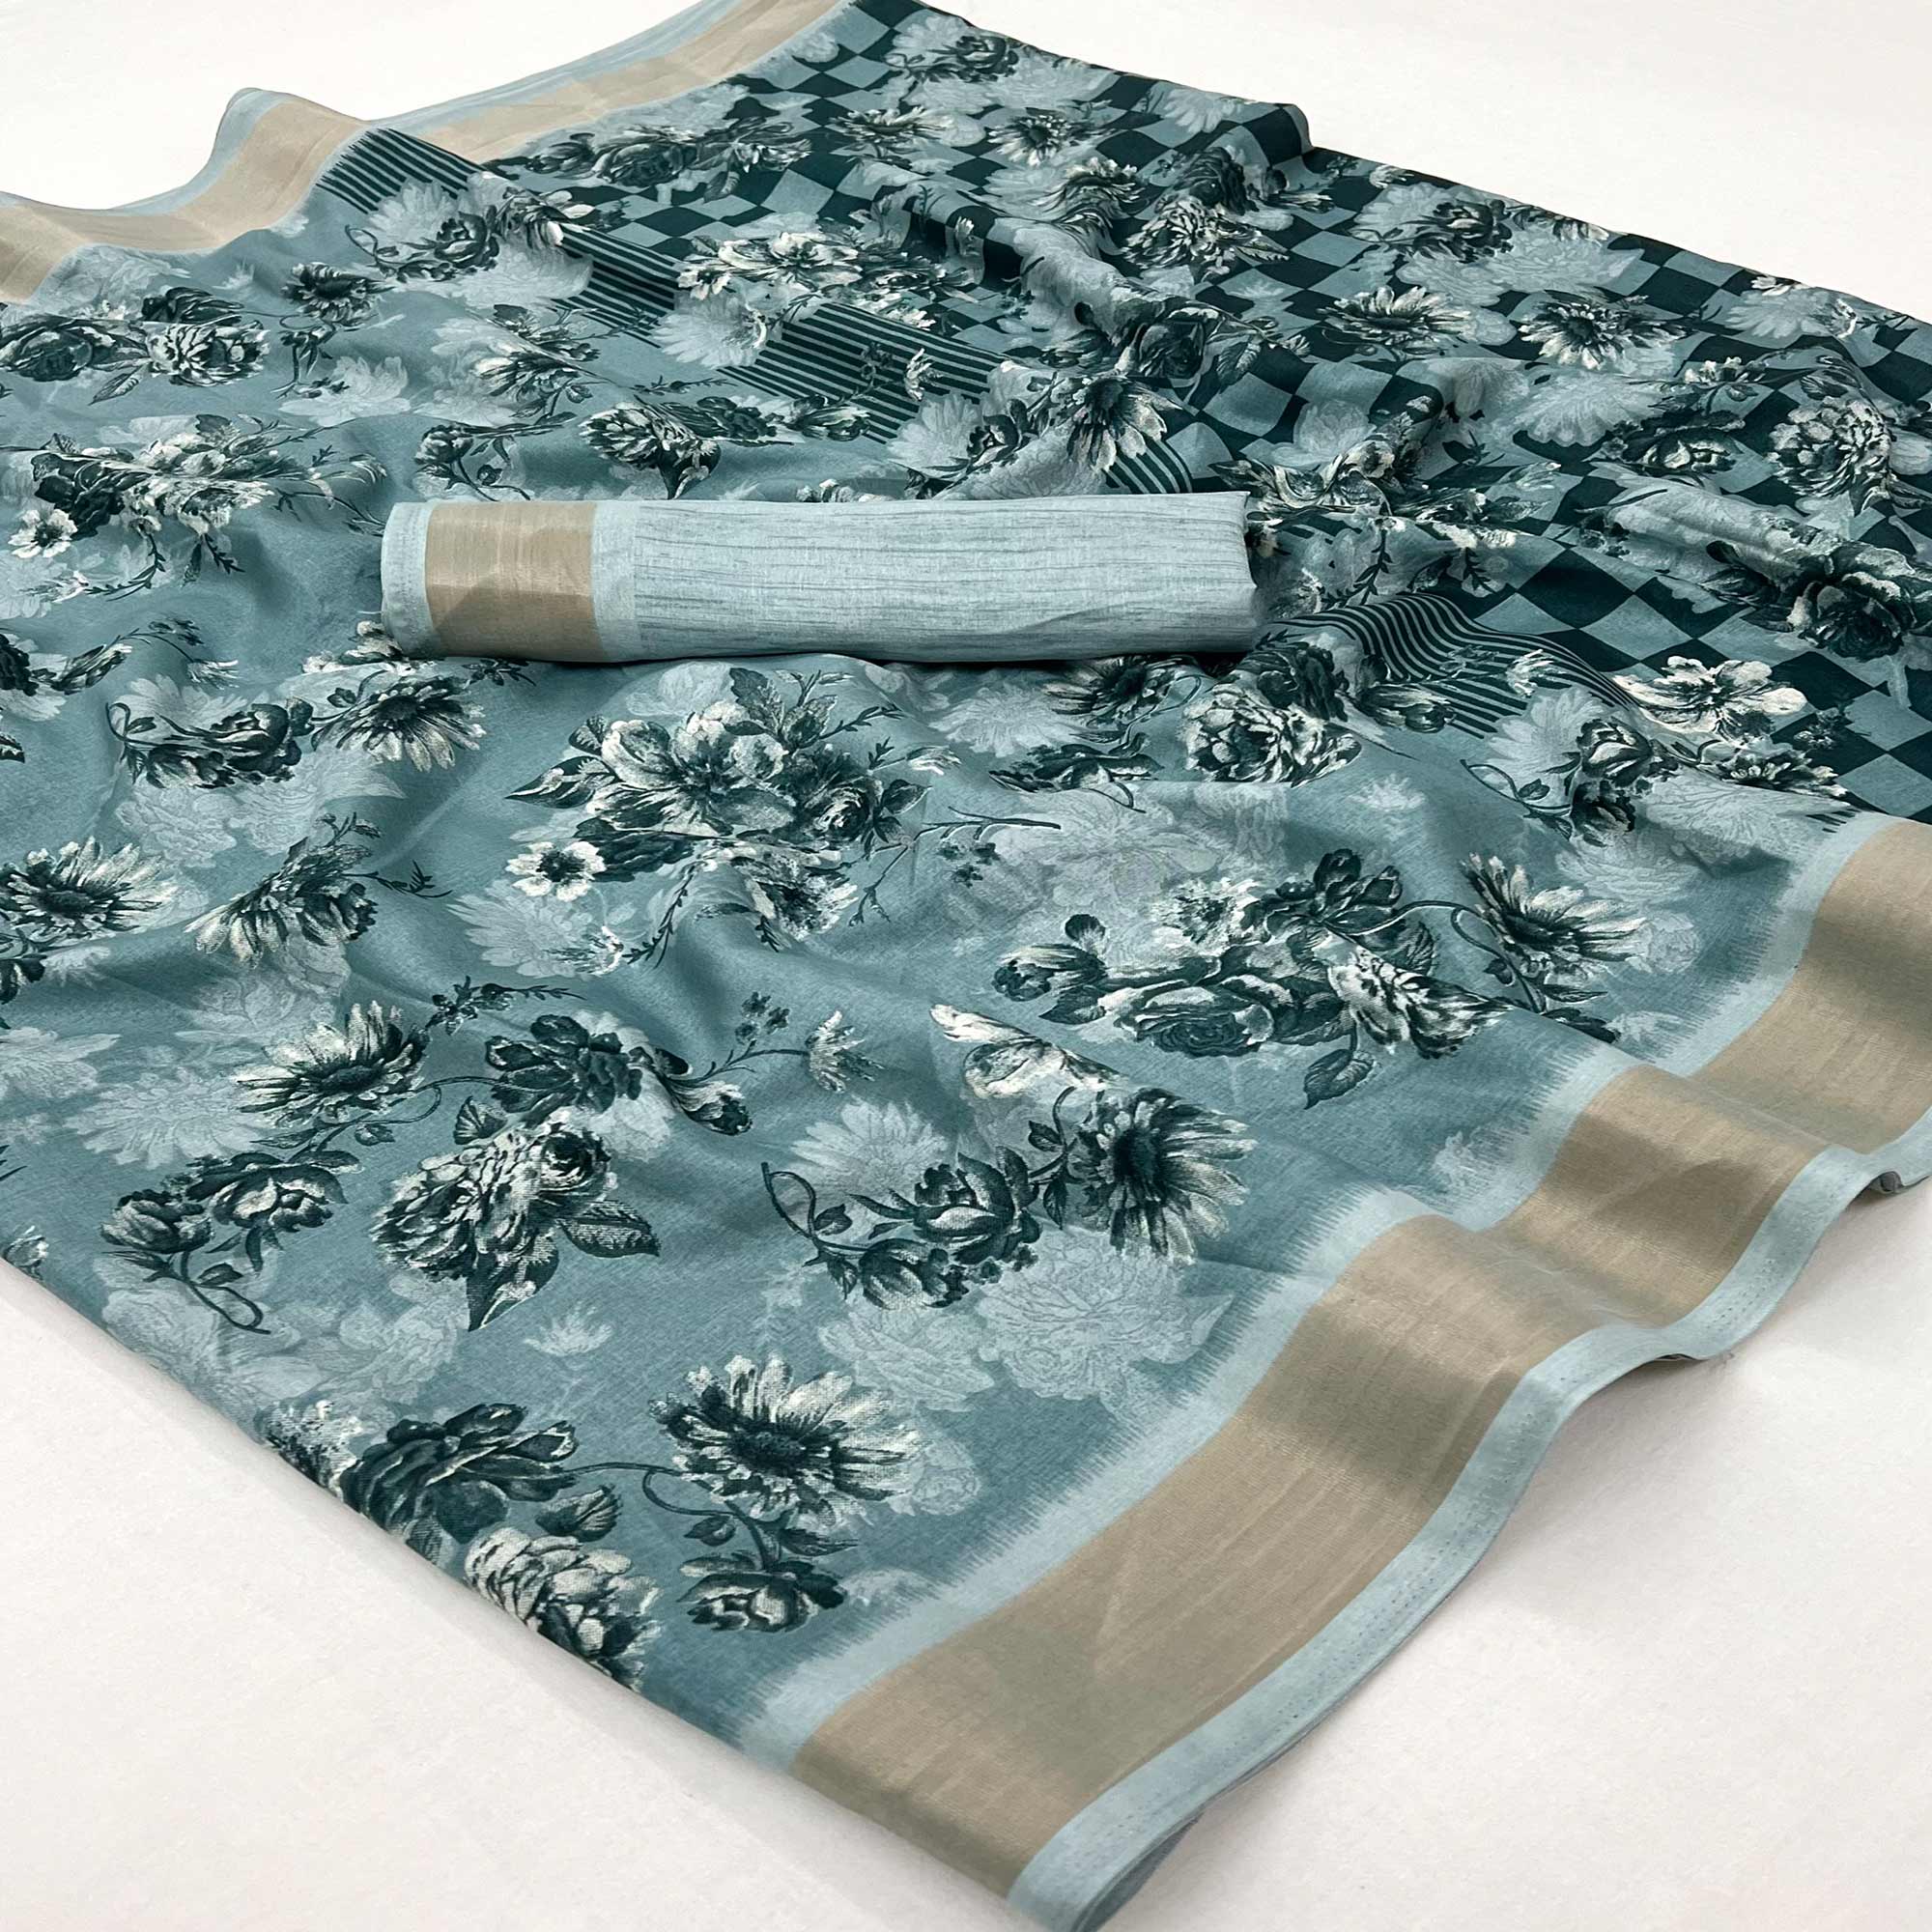 Dusty Blue Floral Printed Dola Silk Saree With Woven Border